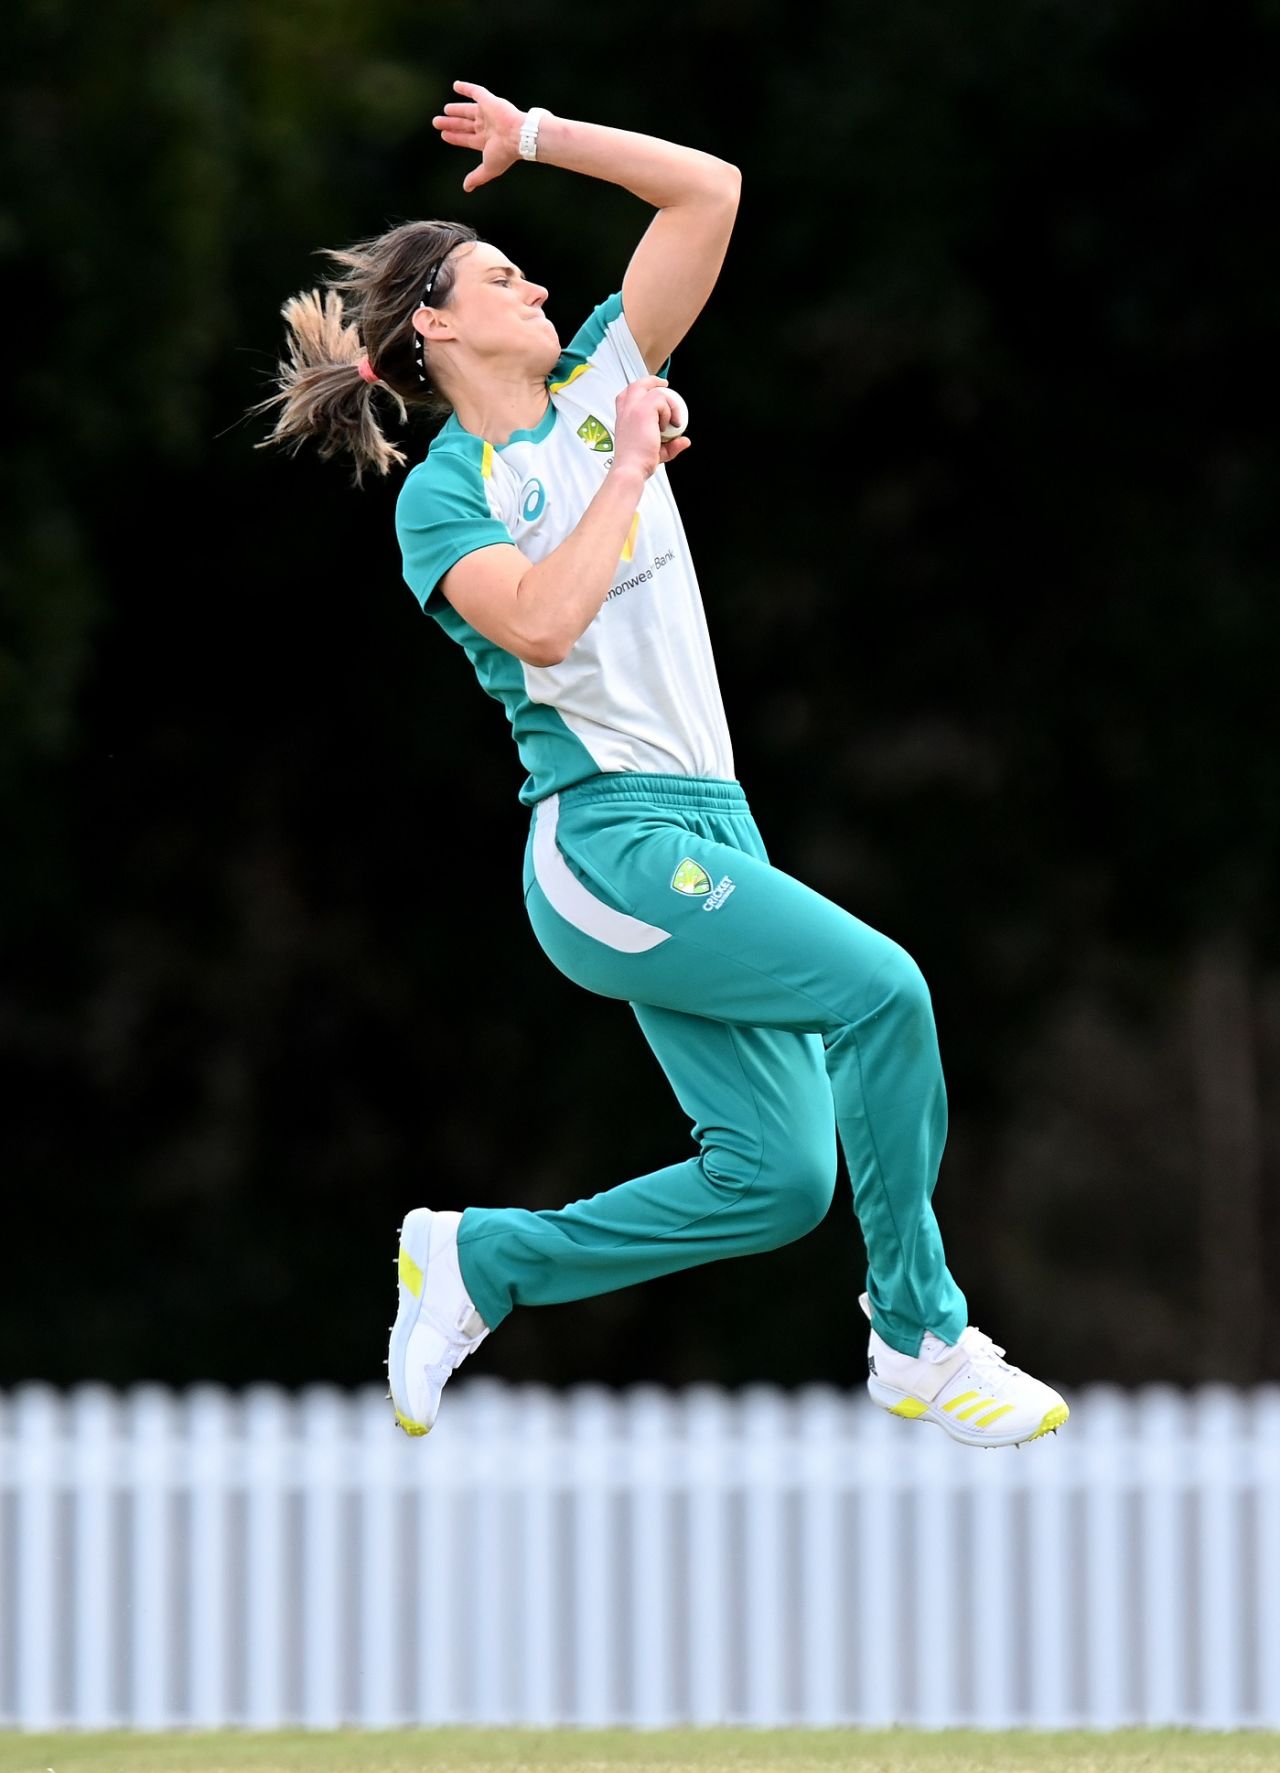 Ellyse Perry bowls during a warm-up game, Northern Suburbs District Cricket Club, Brisbane, September 16, 2021